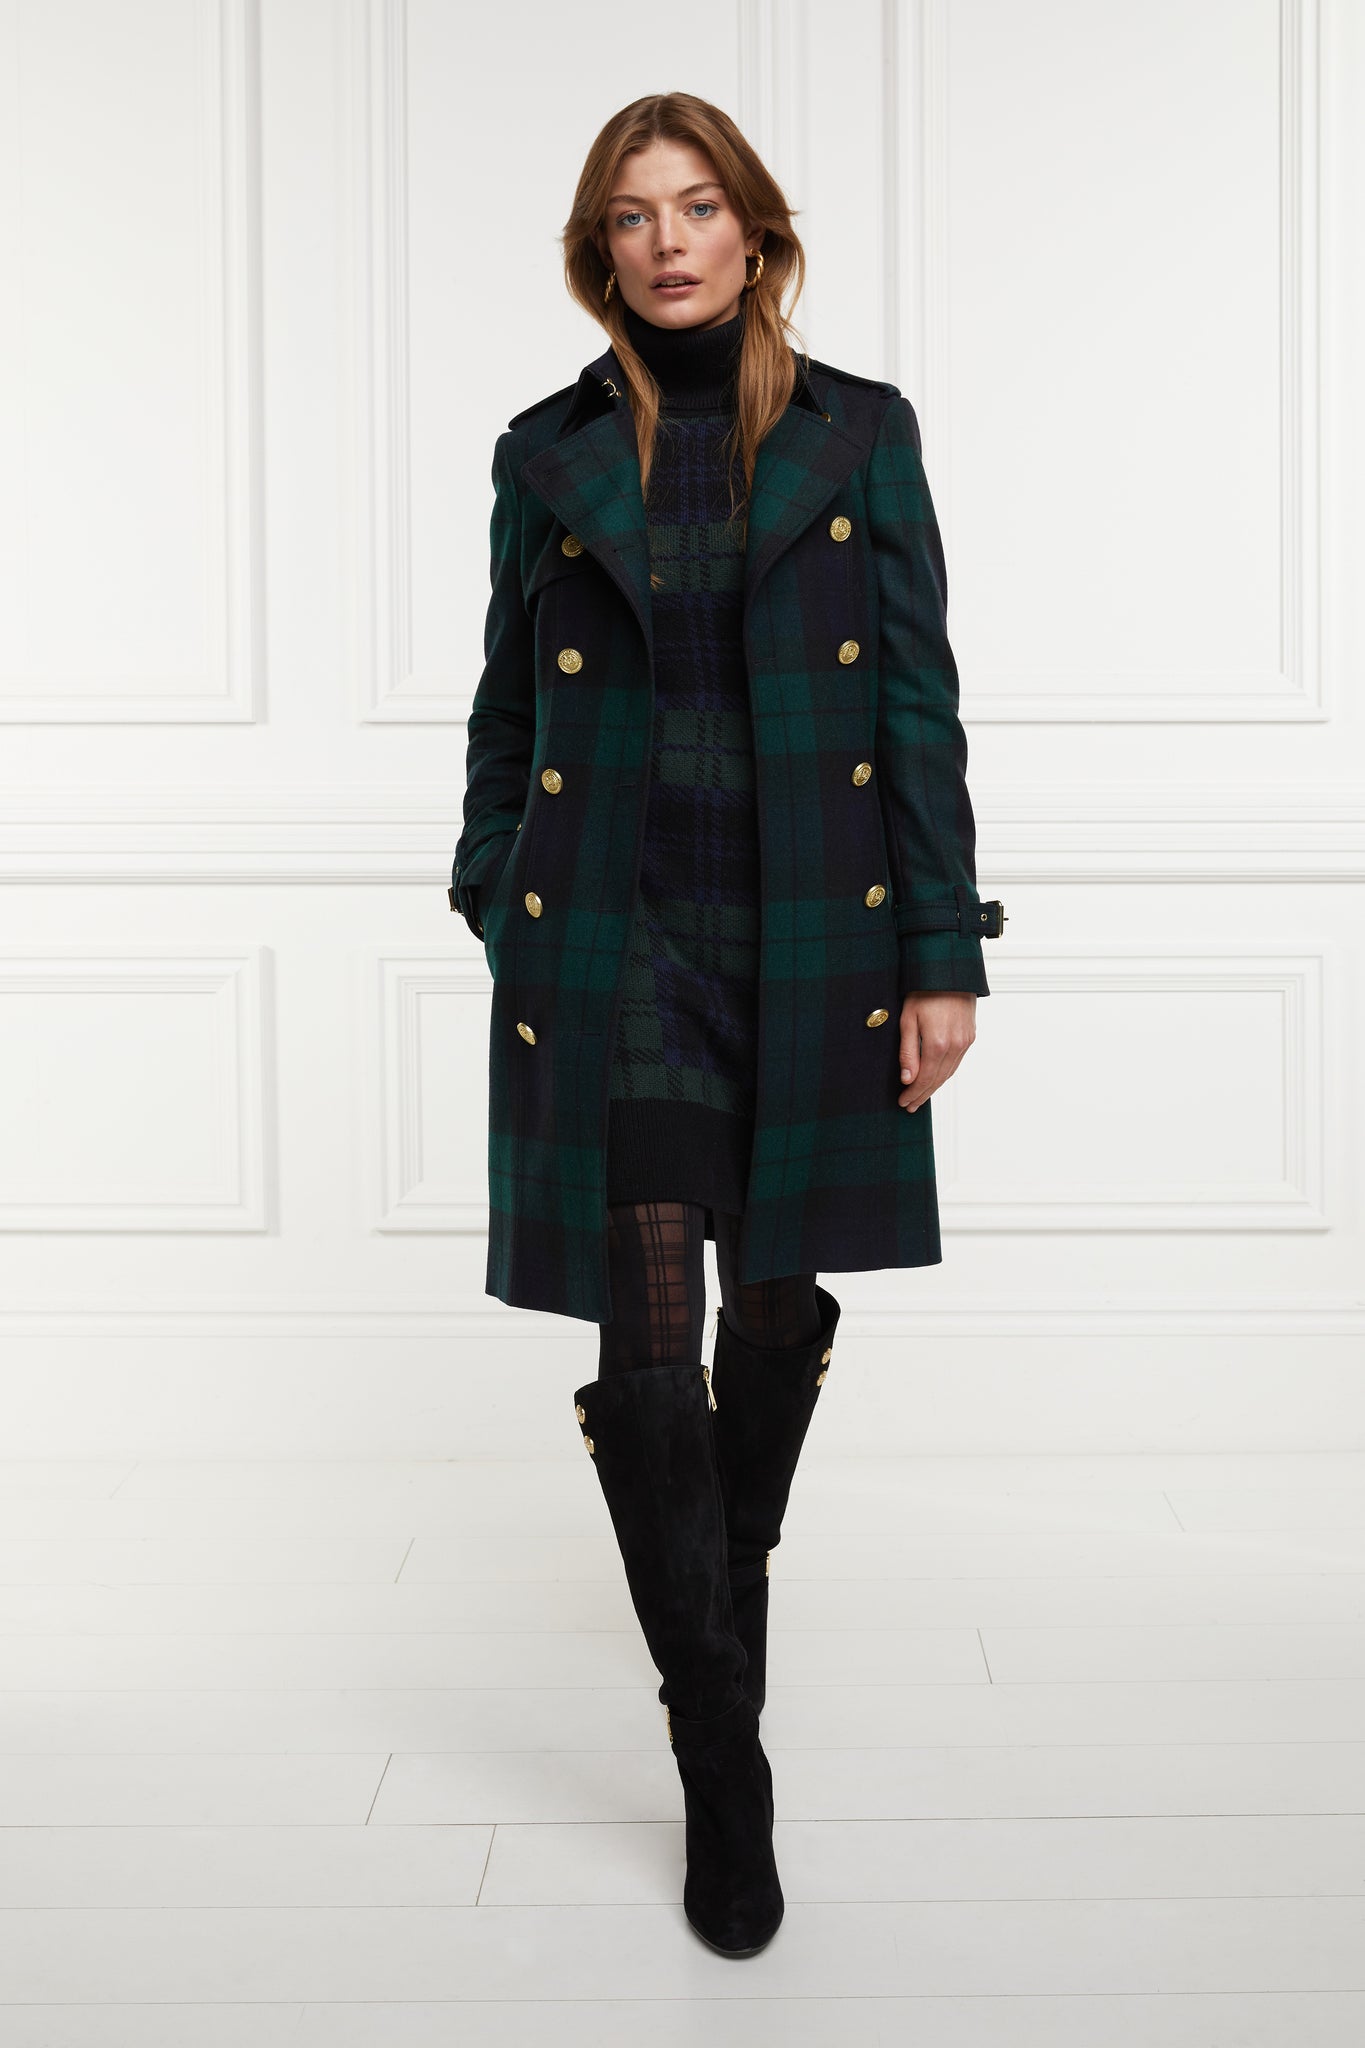 womens green navy and black blackwatch roll neck jumper dress with contrast black cuffs and ribbed hem with gold button detail on the cuffs and shoulder under blackwatch mid length trench coat